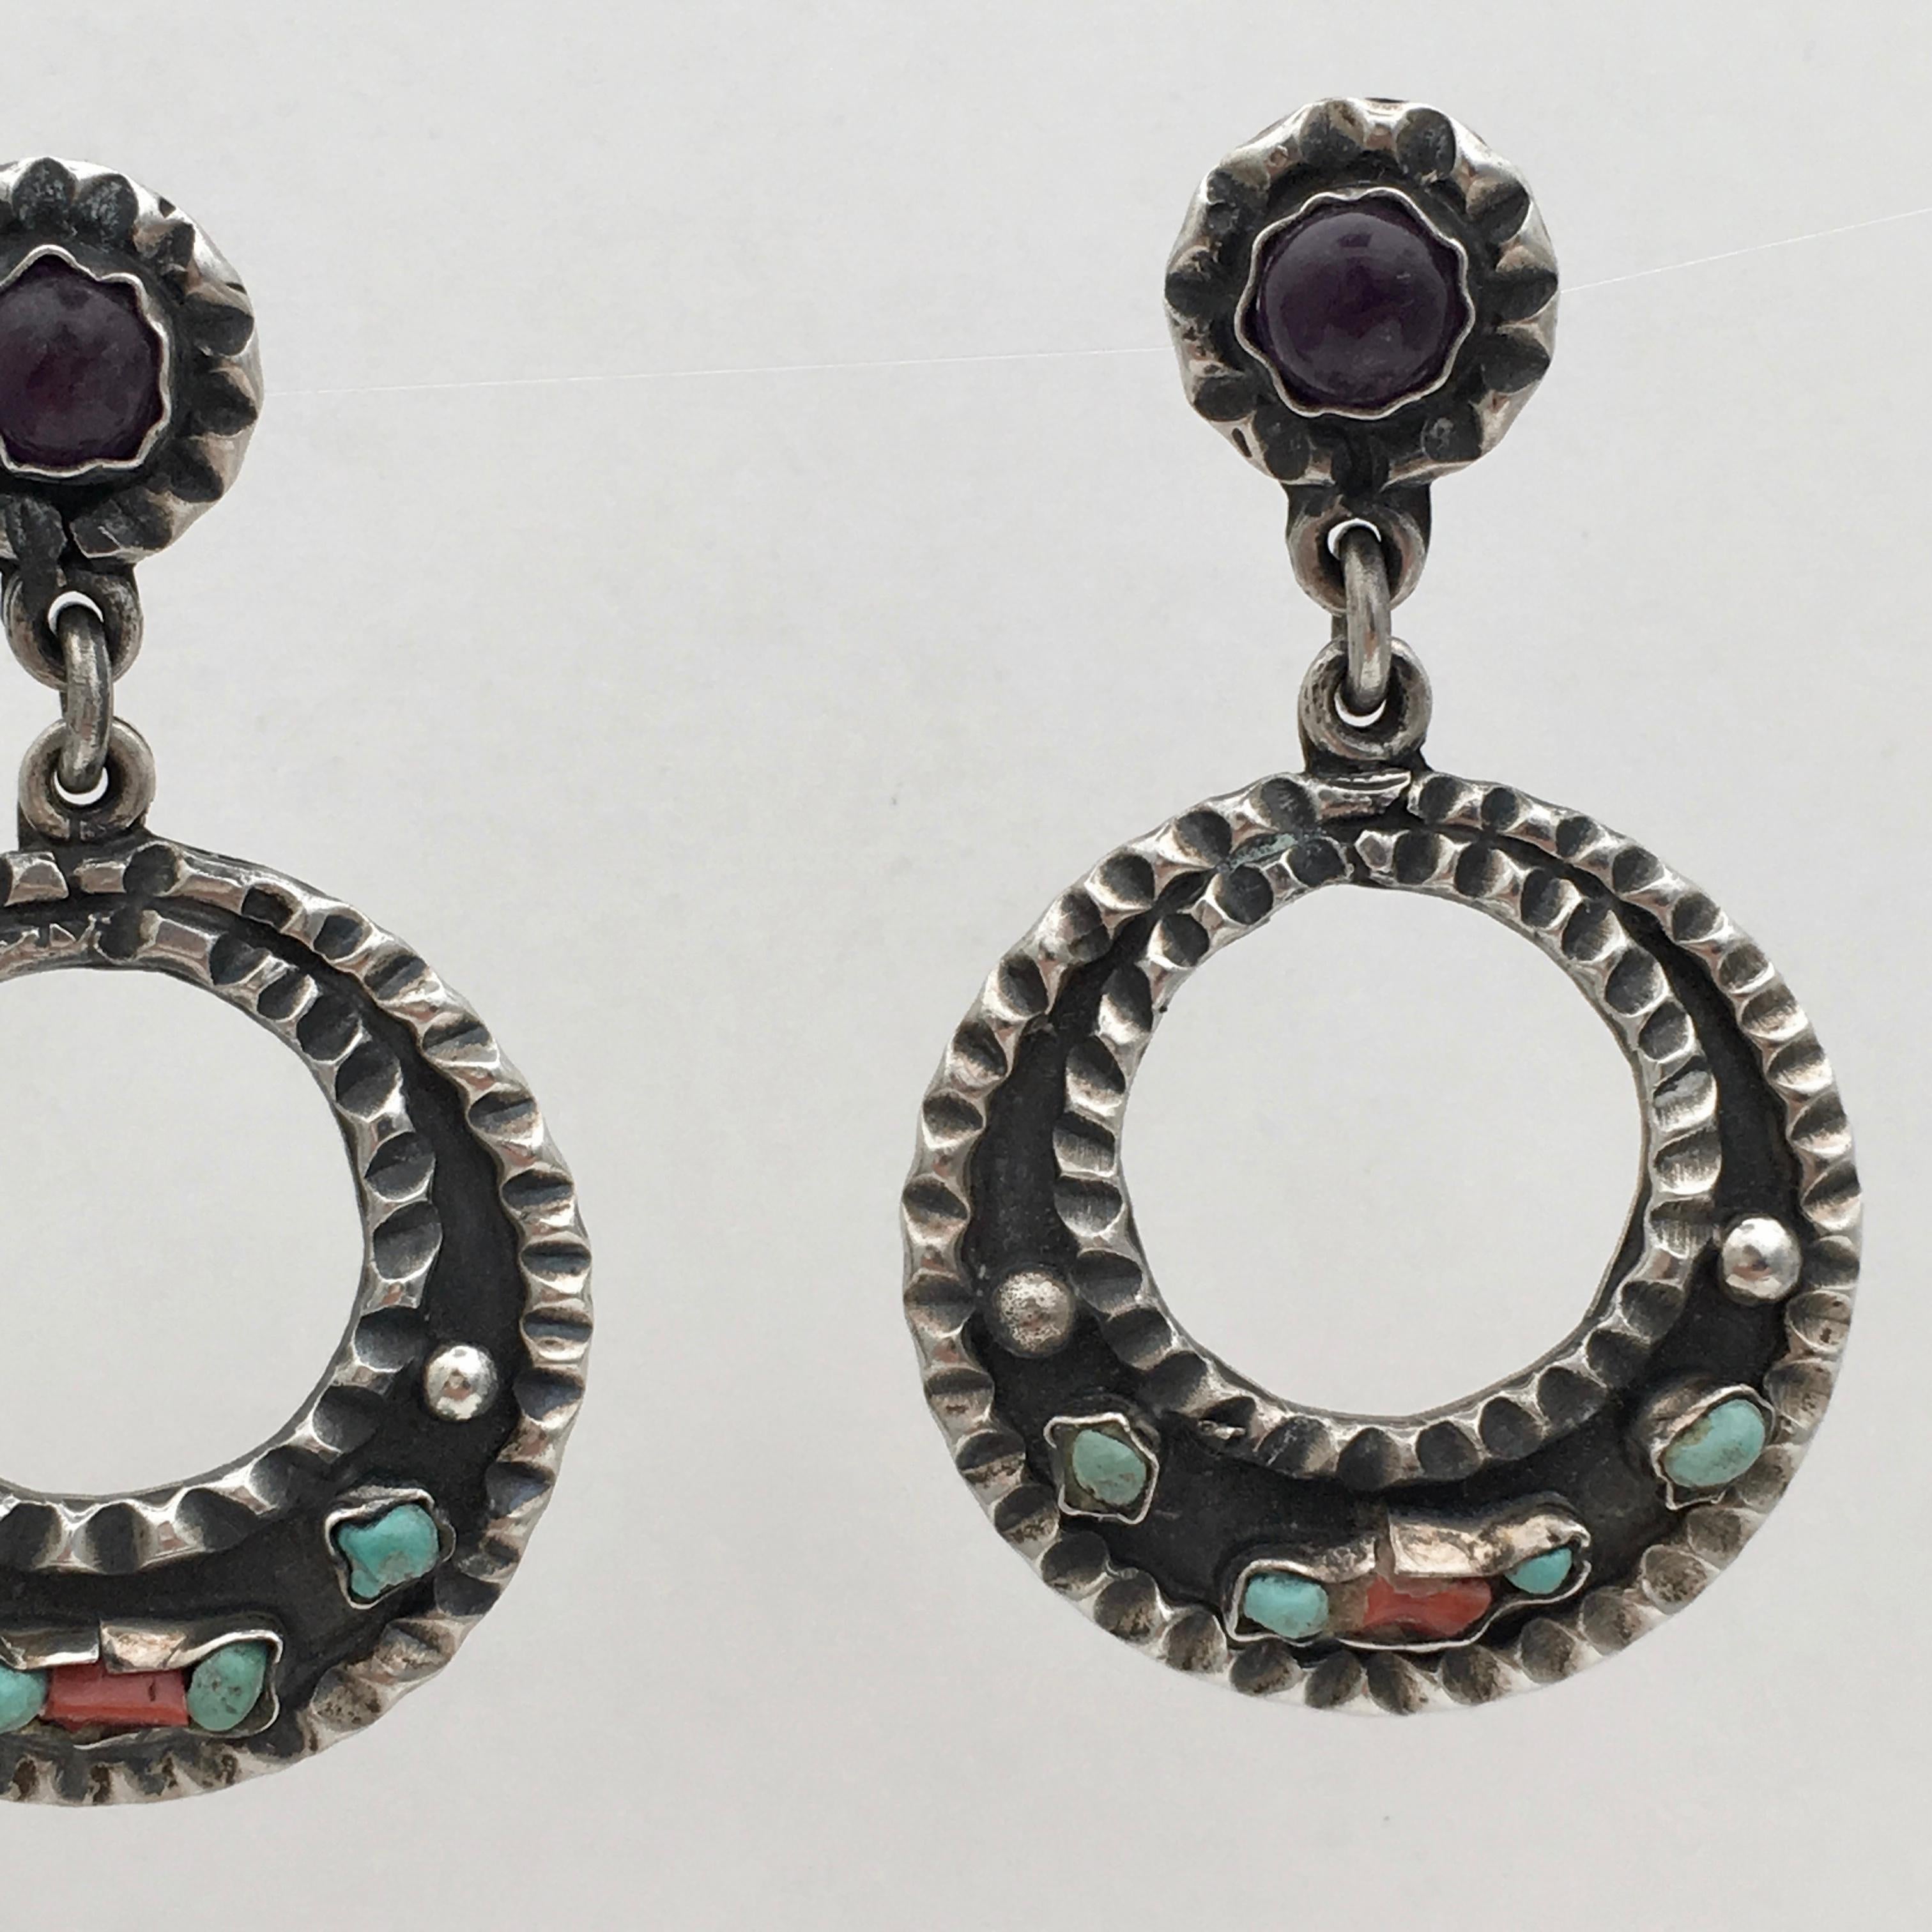 The bold design of this handcrafted pair of earrings embodies the essence of a trip to Mexico. Set with cabochon amethysts, turquoise and coral, they are colourful and eye-catching. The design is pleasingly articulated with a stylish bohemian edge